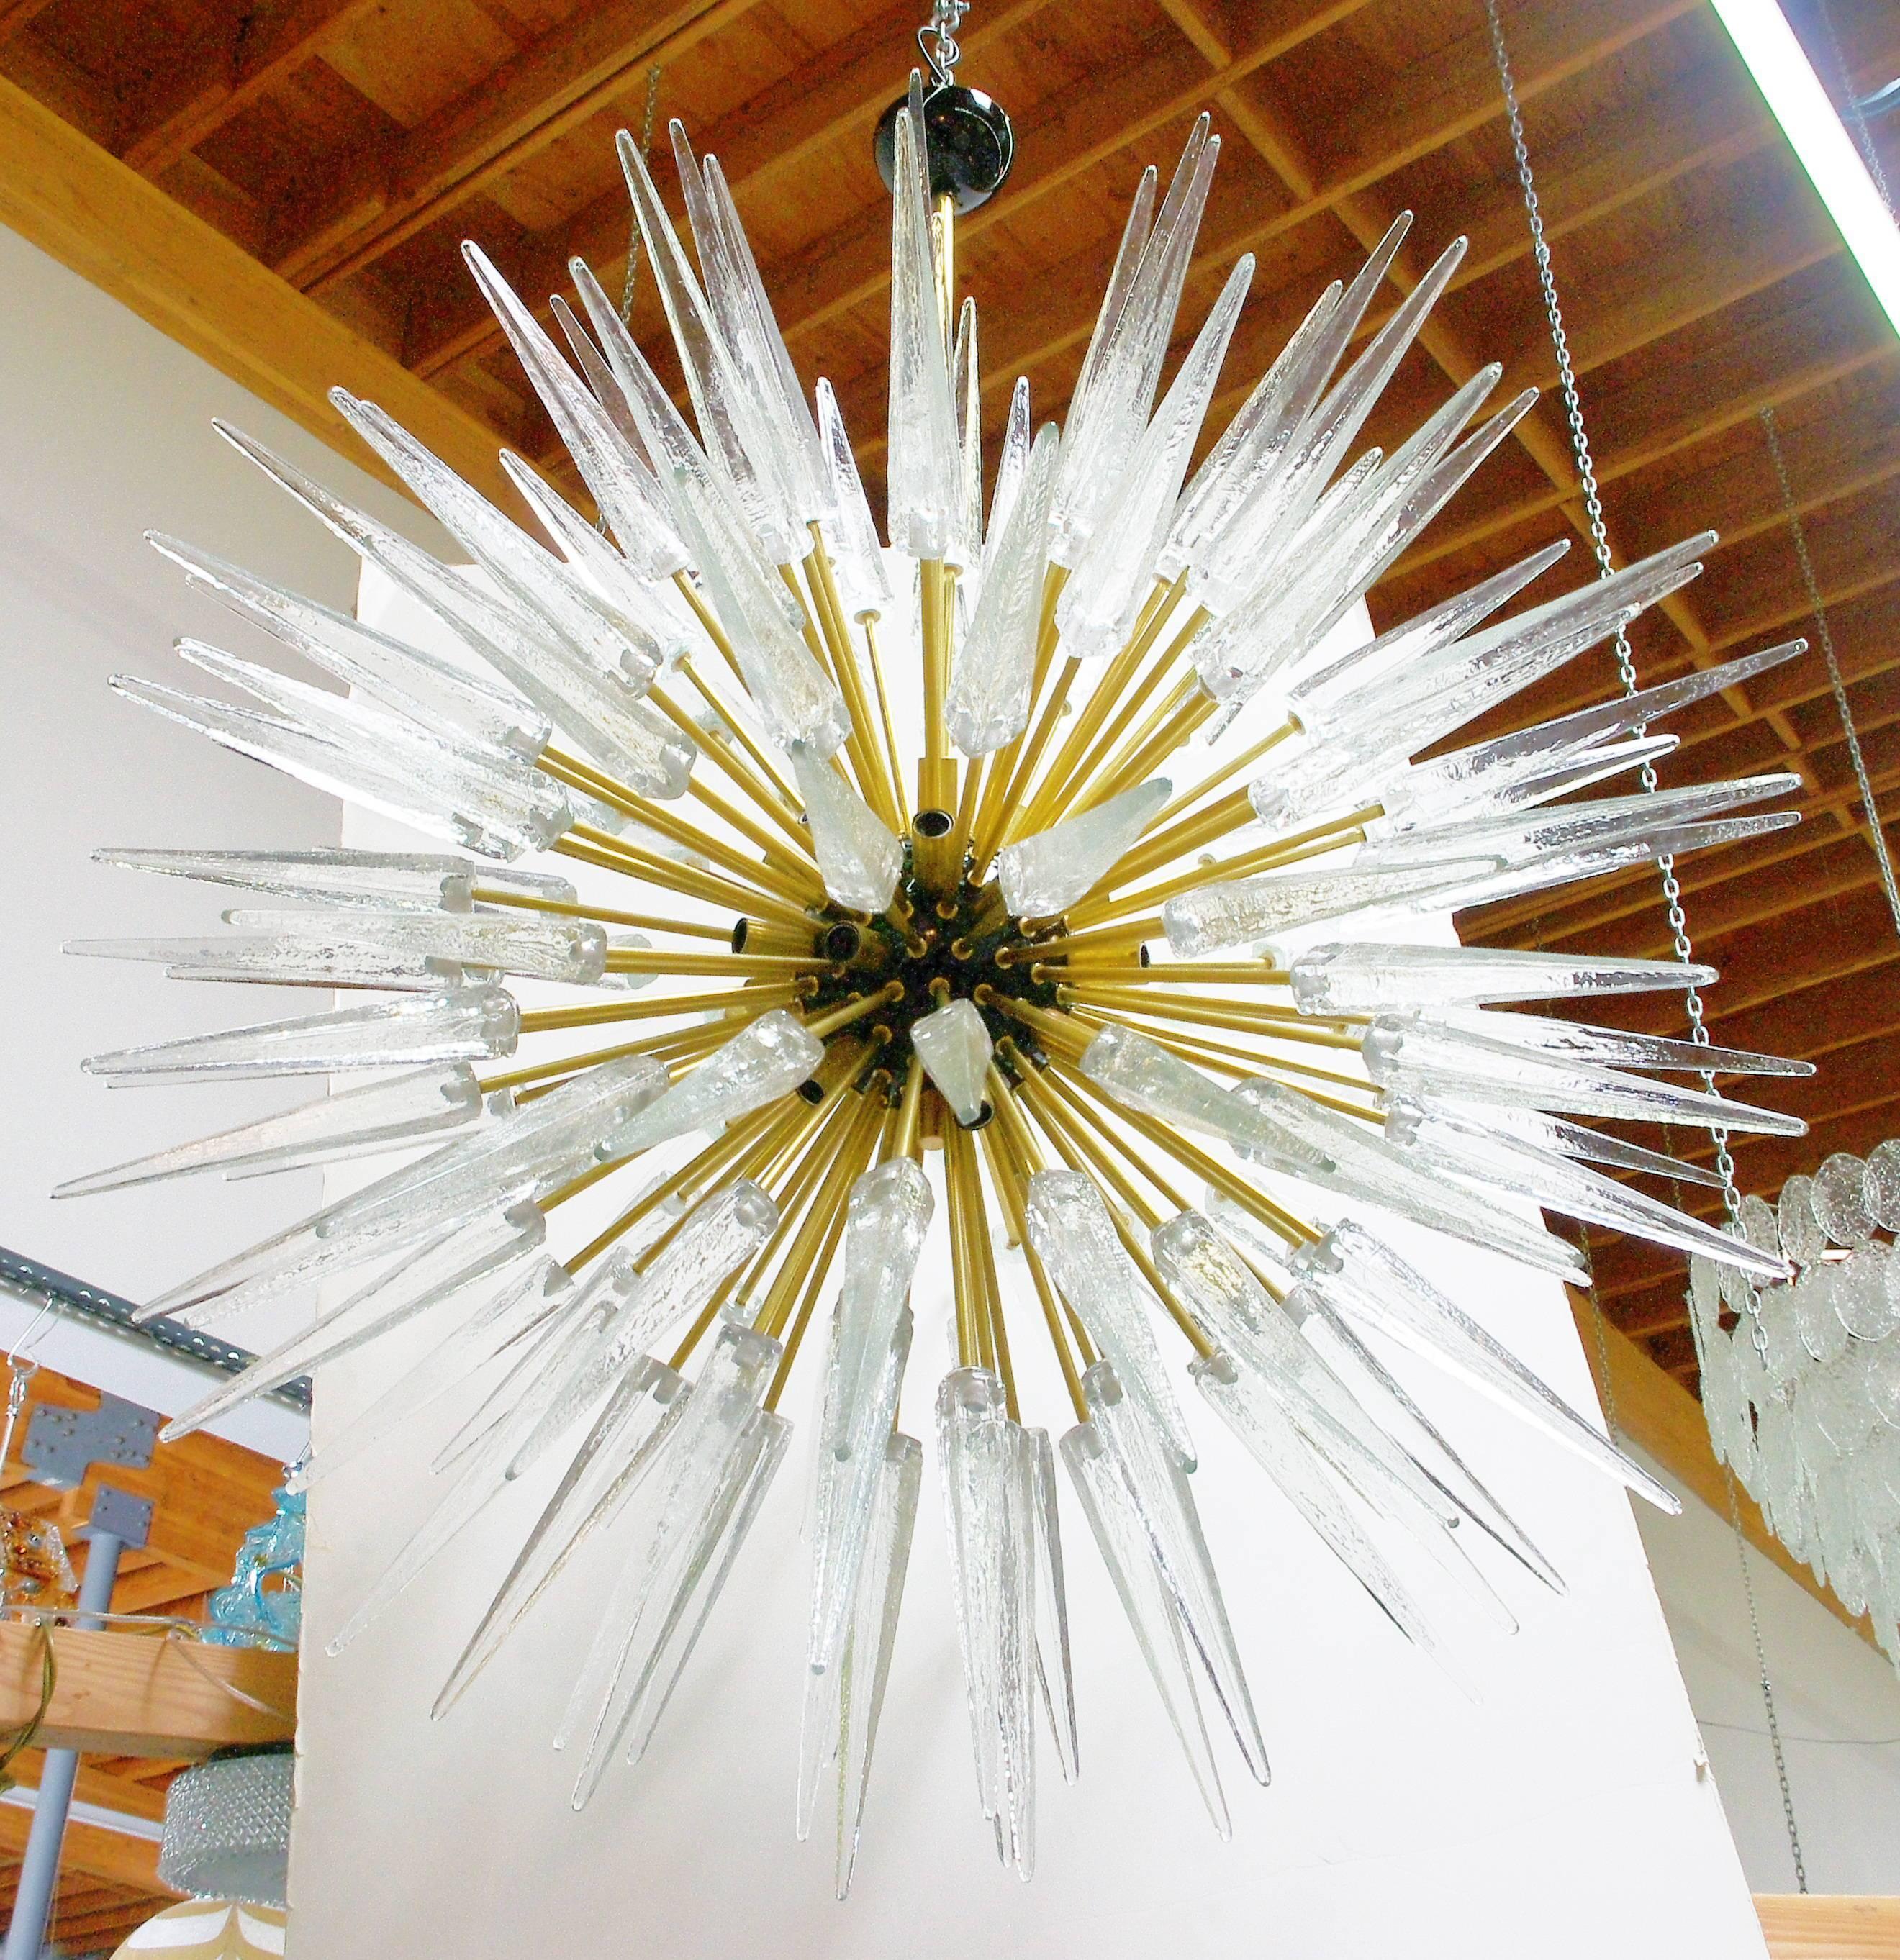 Italian modern Sputnik chandelier shown with clear Murano glass shards, black enameled centre, mounted on brass frame / Designed by Fabio Bergomi for Fabio Ltd / Made in Italy 
12 lights / E12 or E14 type / Max 40W each
Diameter: 52 inches / Height: